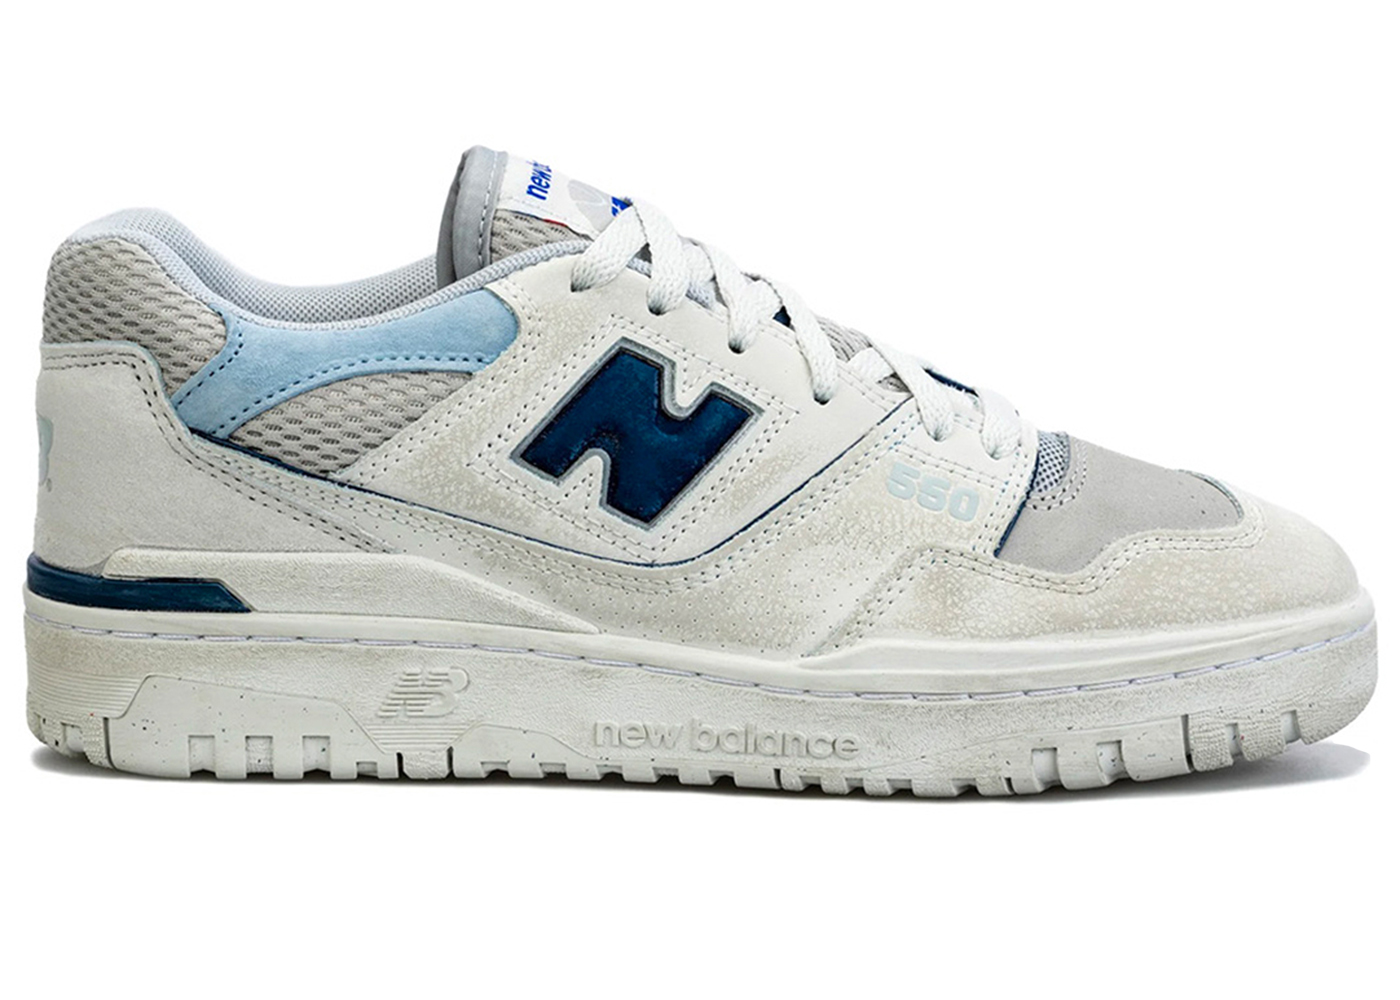 New Balance 550 Aged White Grey Blue Men's - Sneakers - US